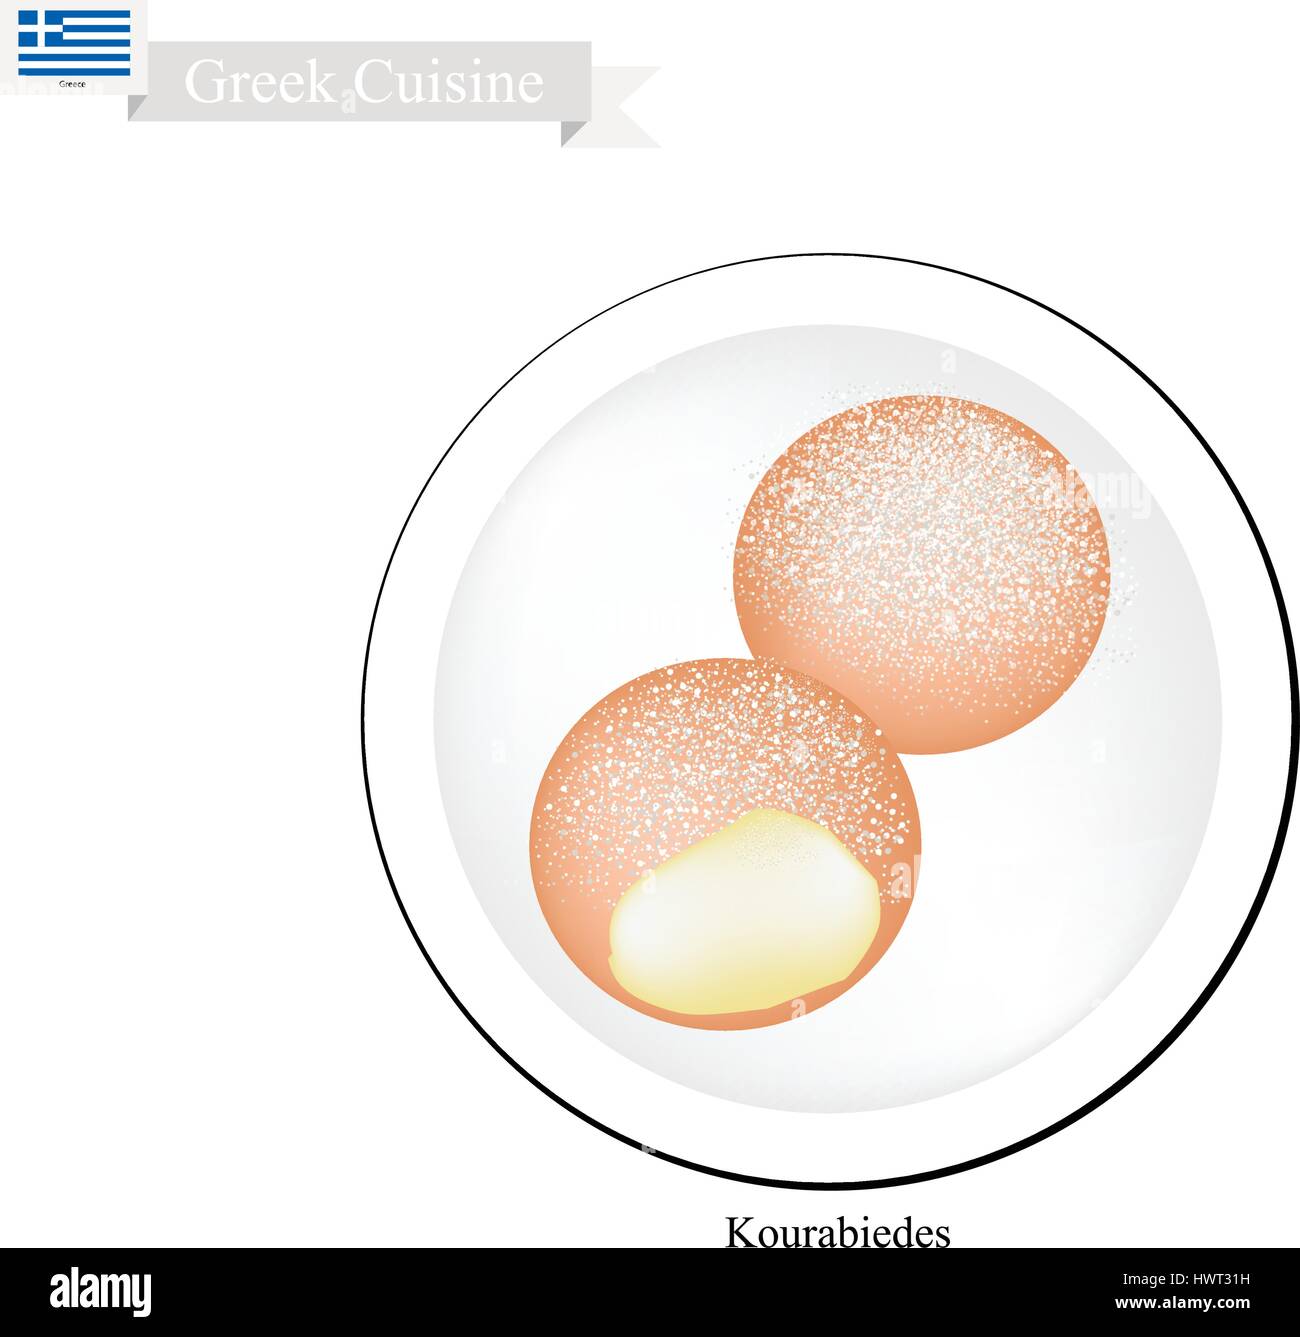 GreekCuisine, Kourabiedes or Traditional Christmas Butter Cookies with Almonds and Icing Sugar. One of Most Famous Dish in Greece. Stock Vector